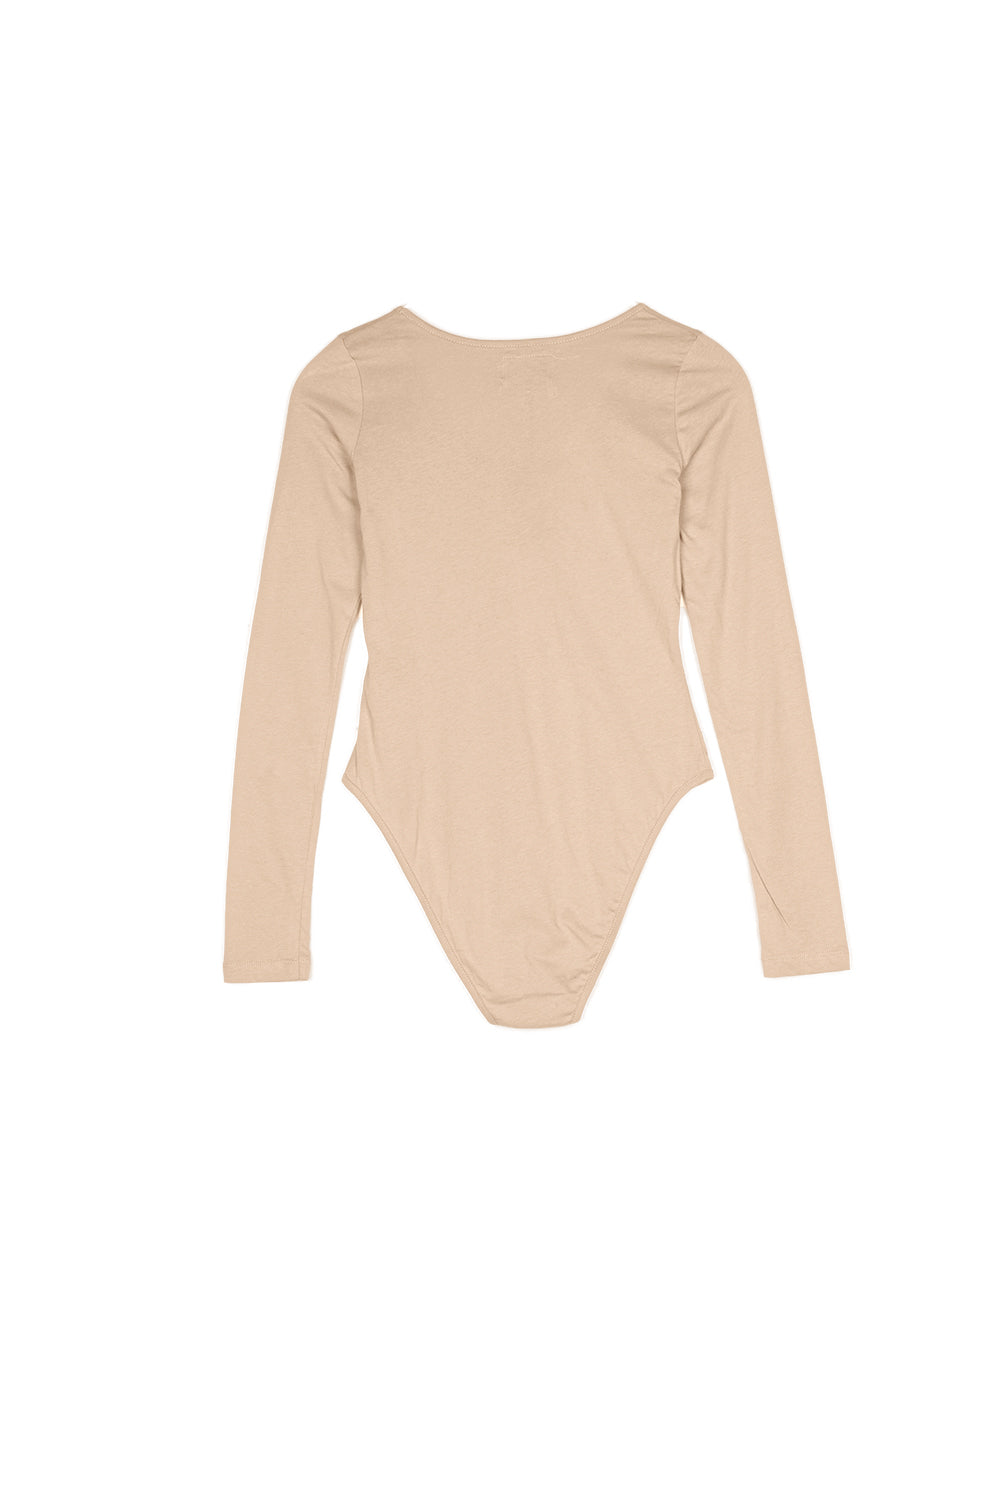 Sixth June - Body manches longues logo beige